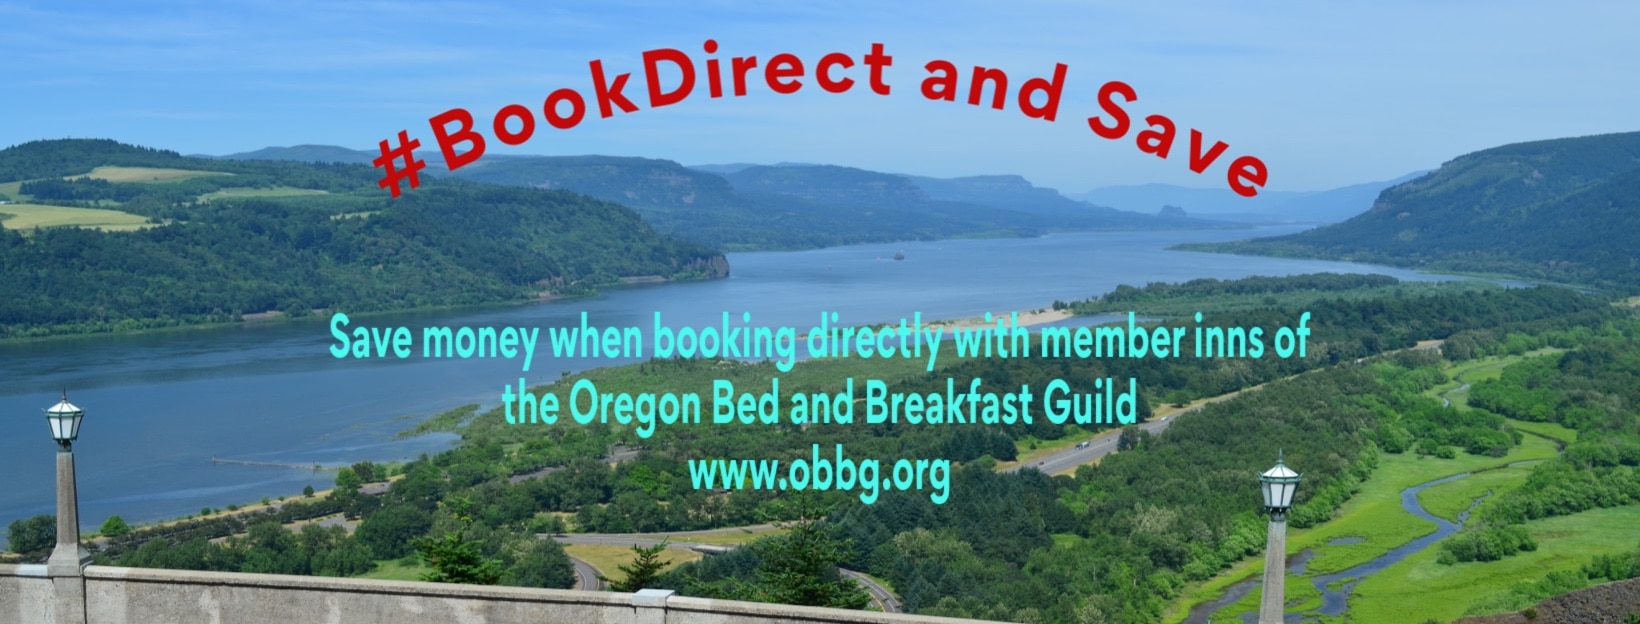 banner with reasons to Book Direct. Columbia River Gorge view